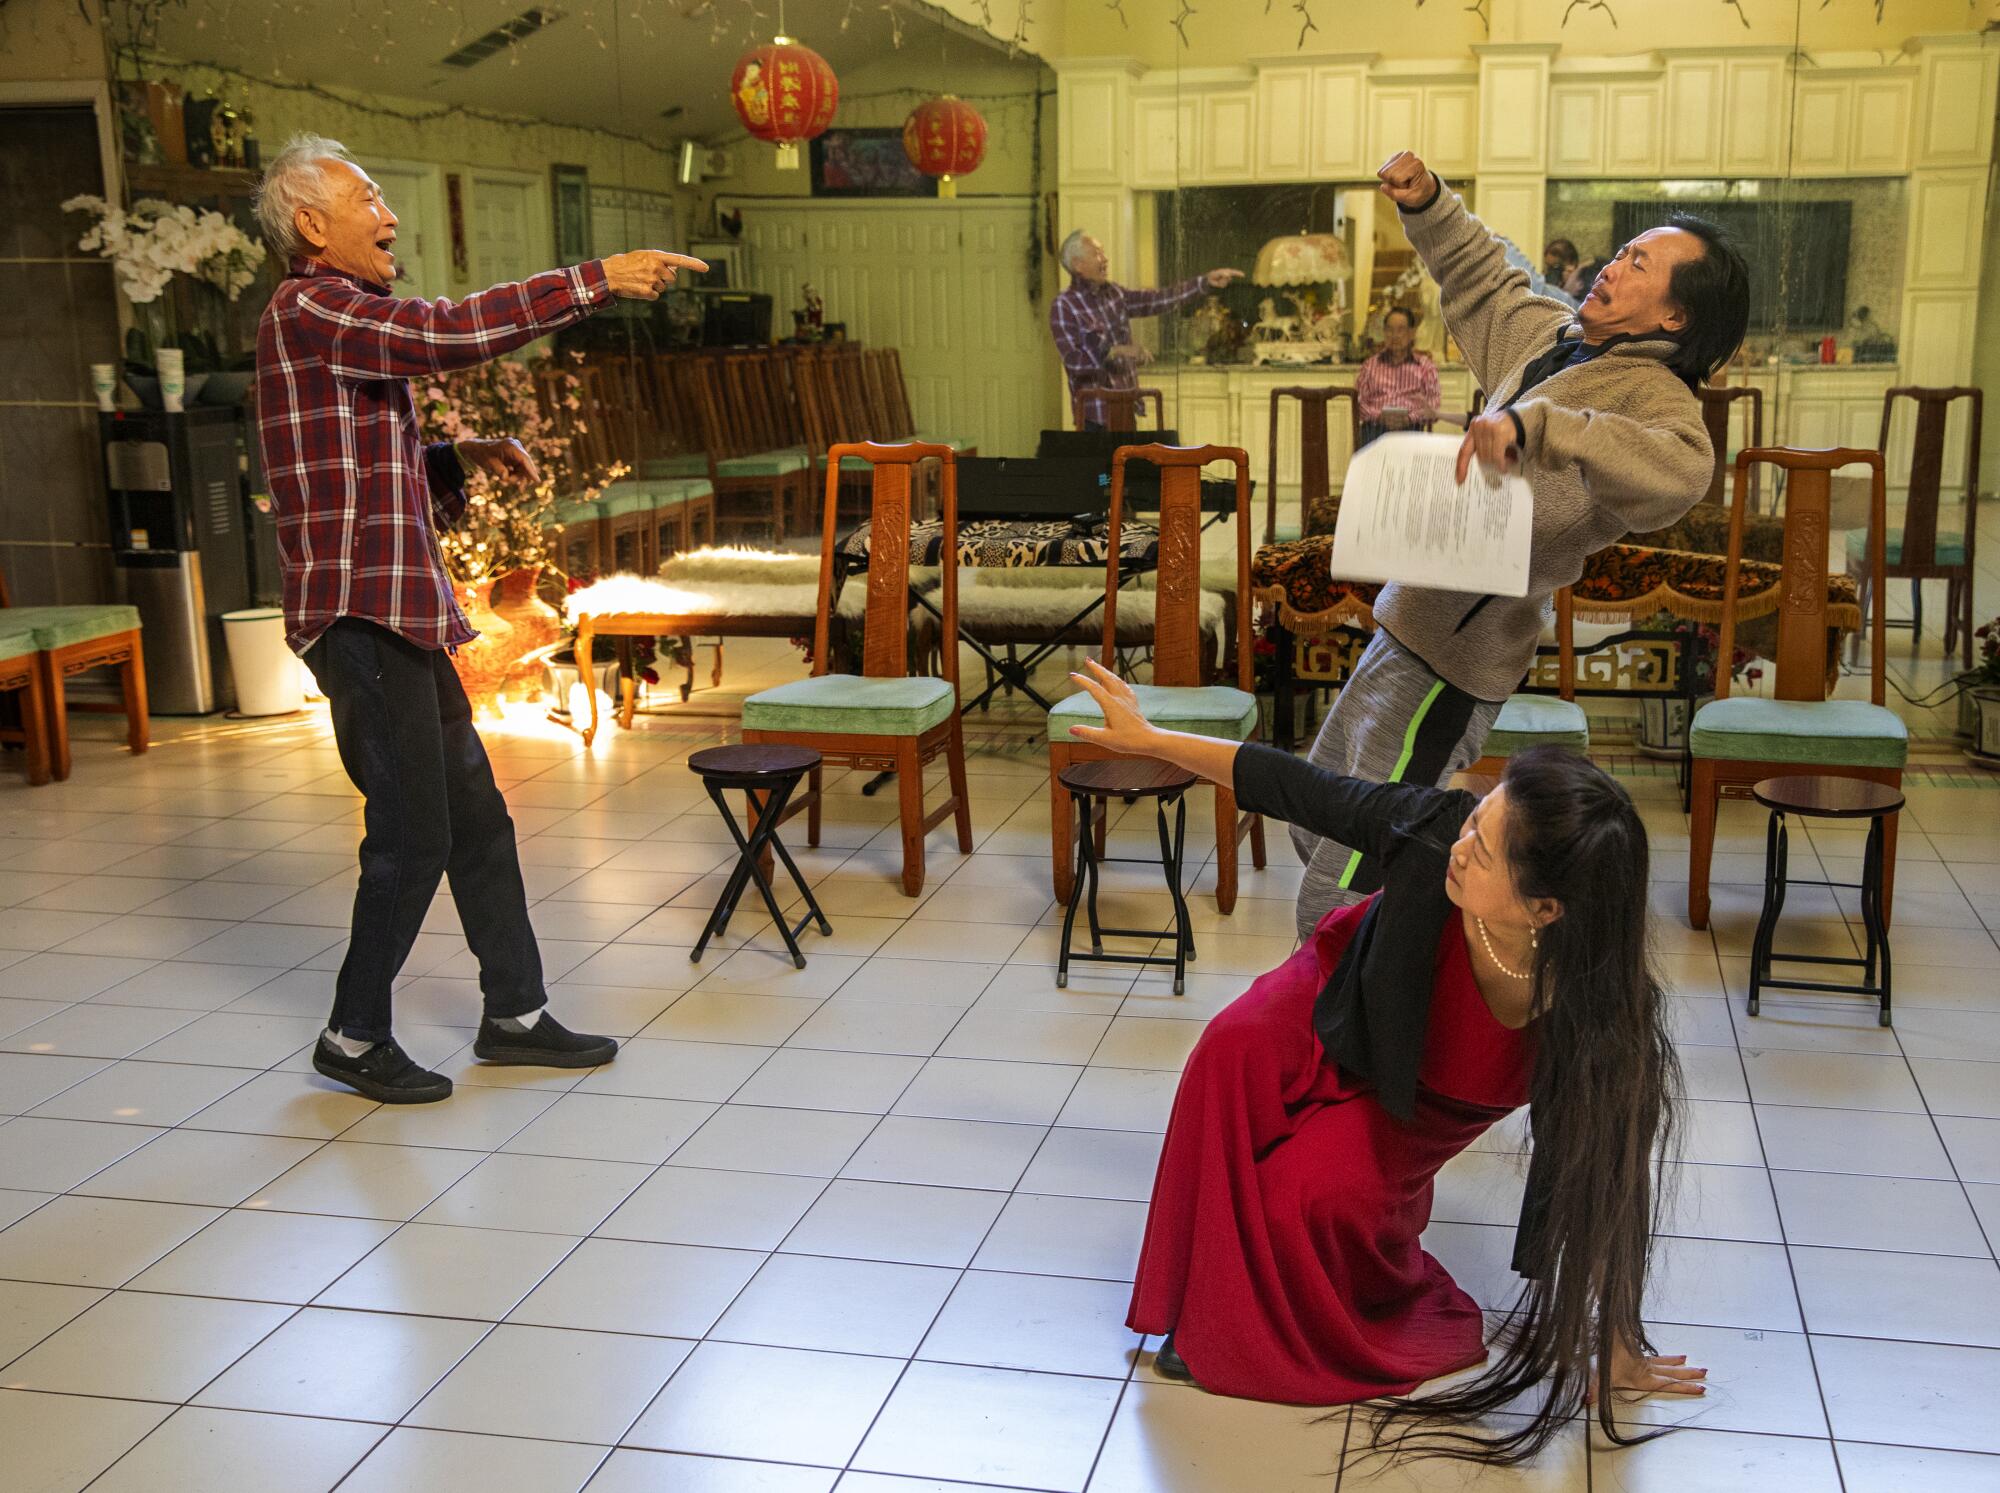 Rehearsal of a play about the mass shooting in Monterey Park.